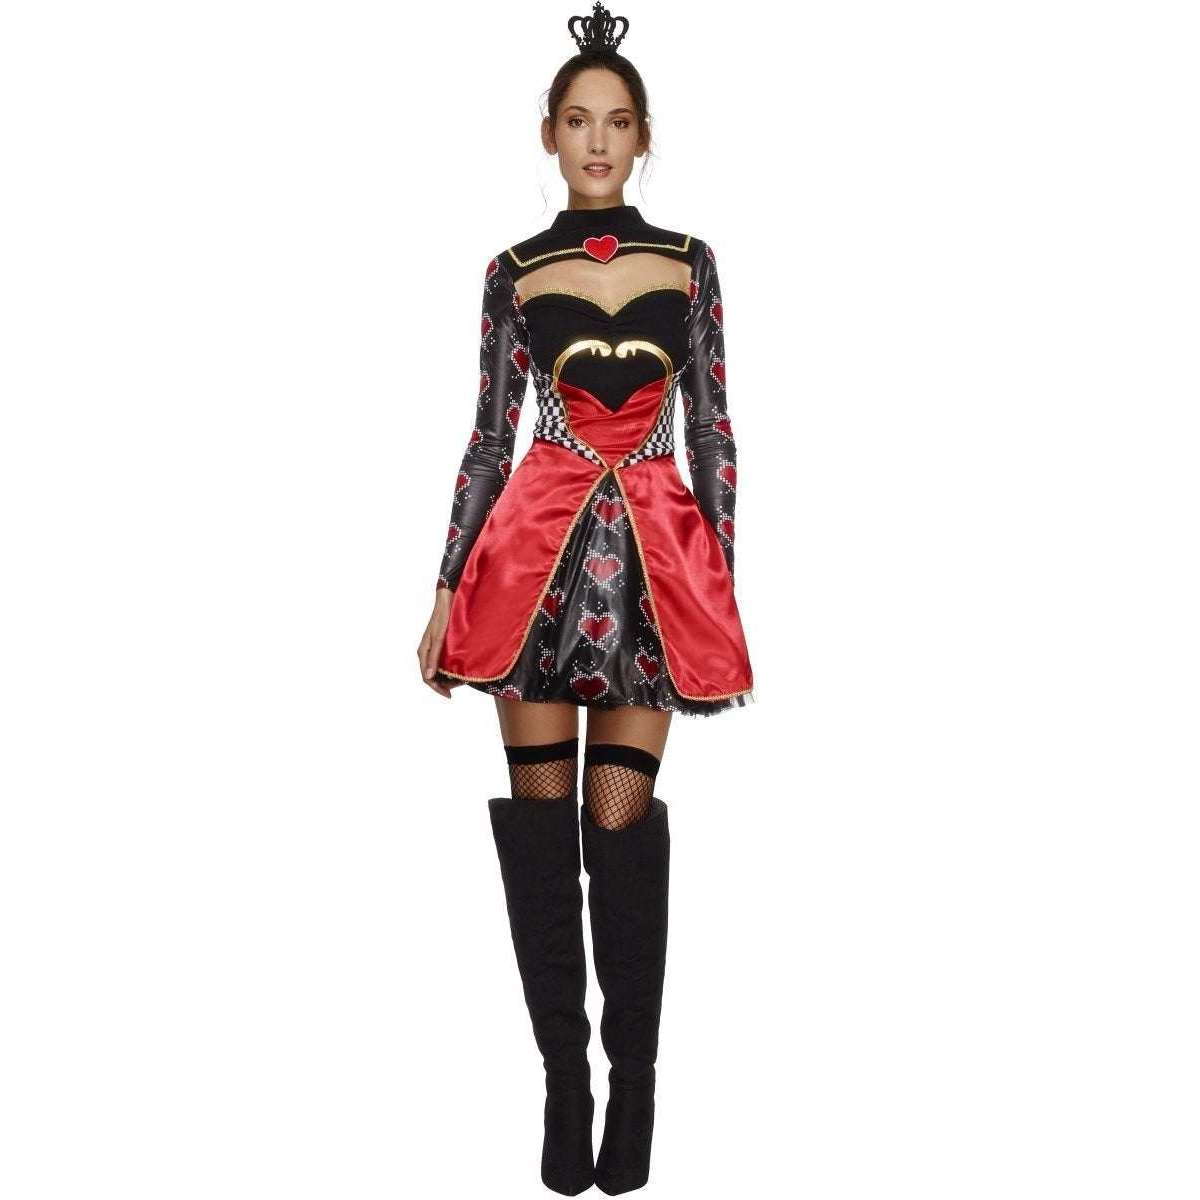 Sexy Monarch Queen Of Hearts Adult Costume